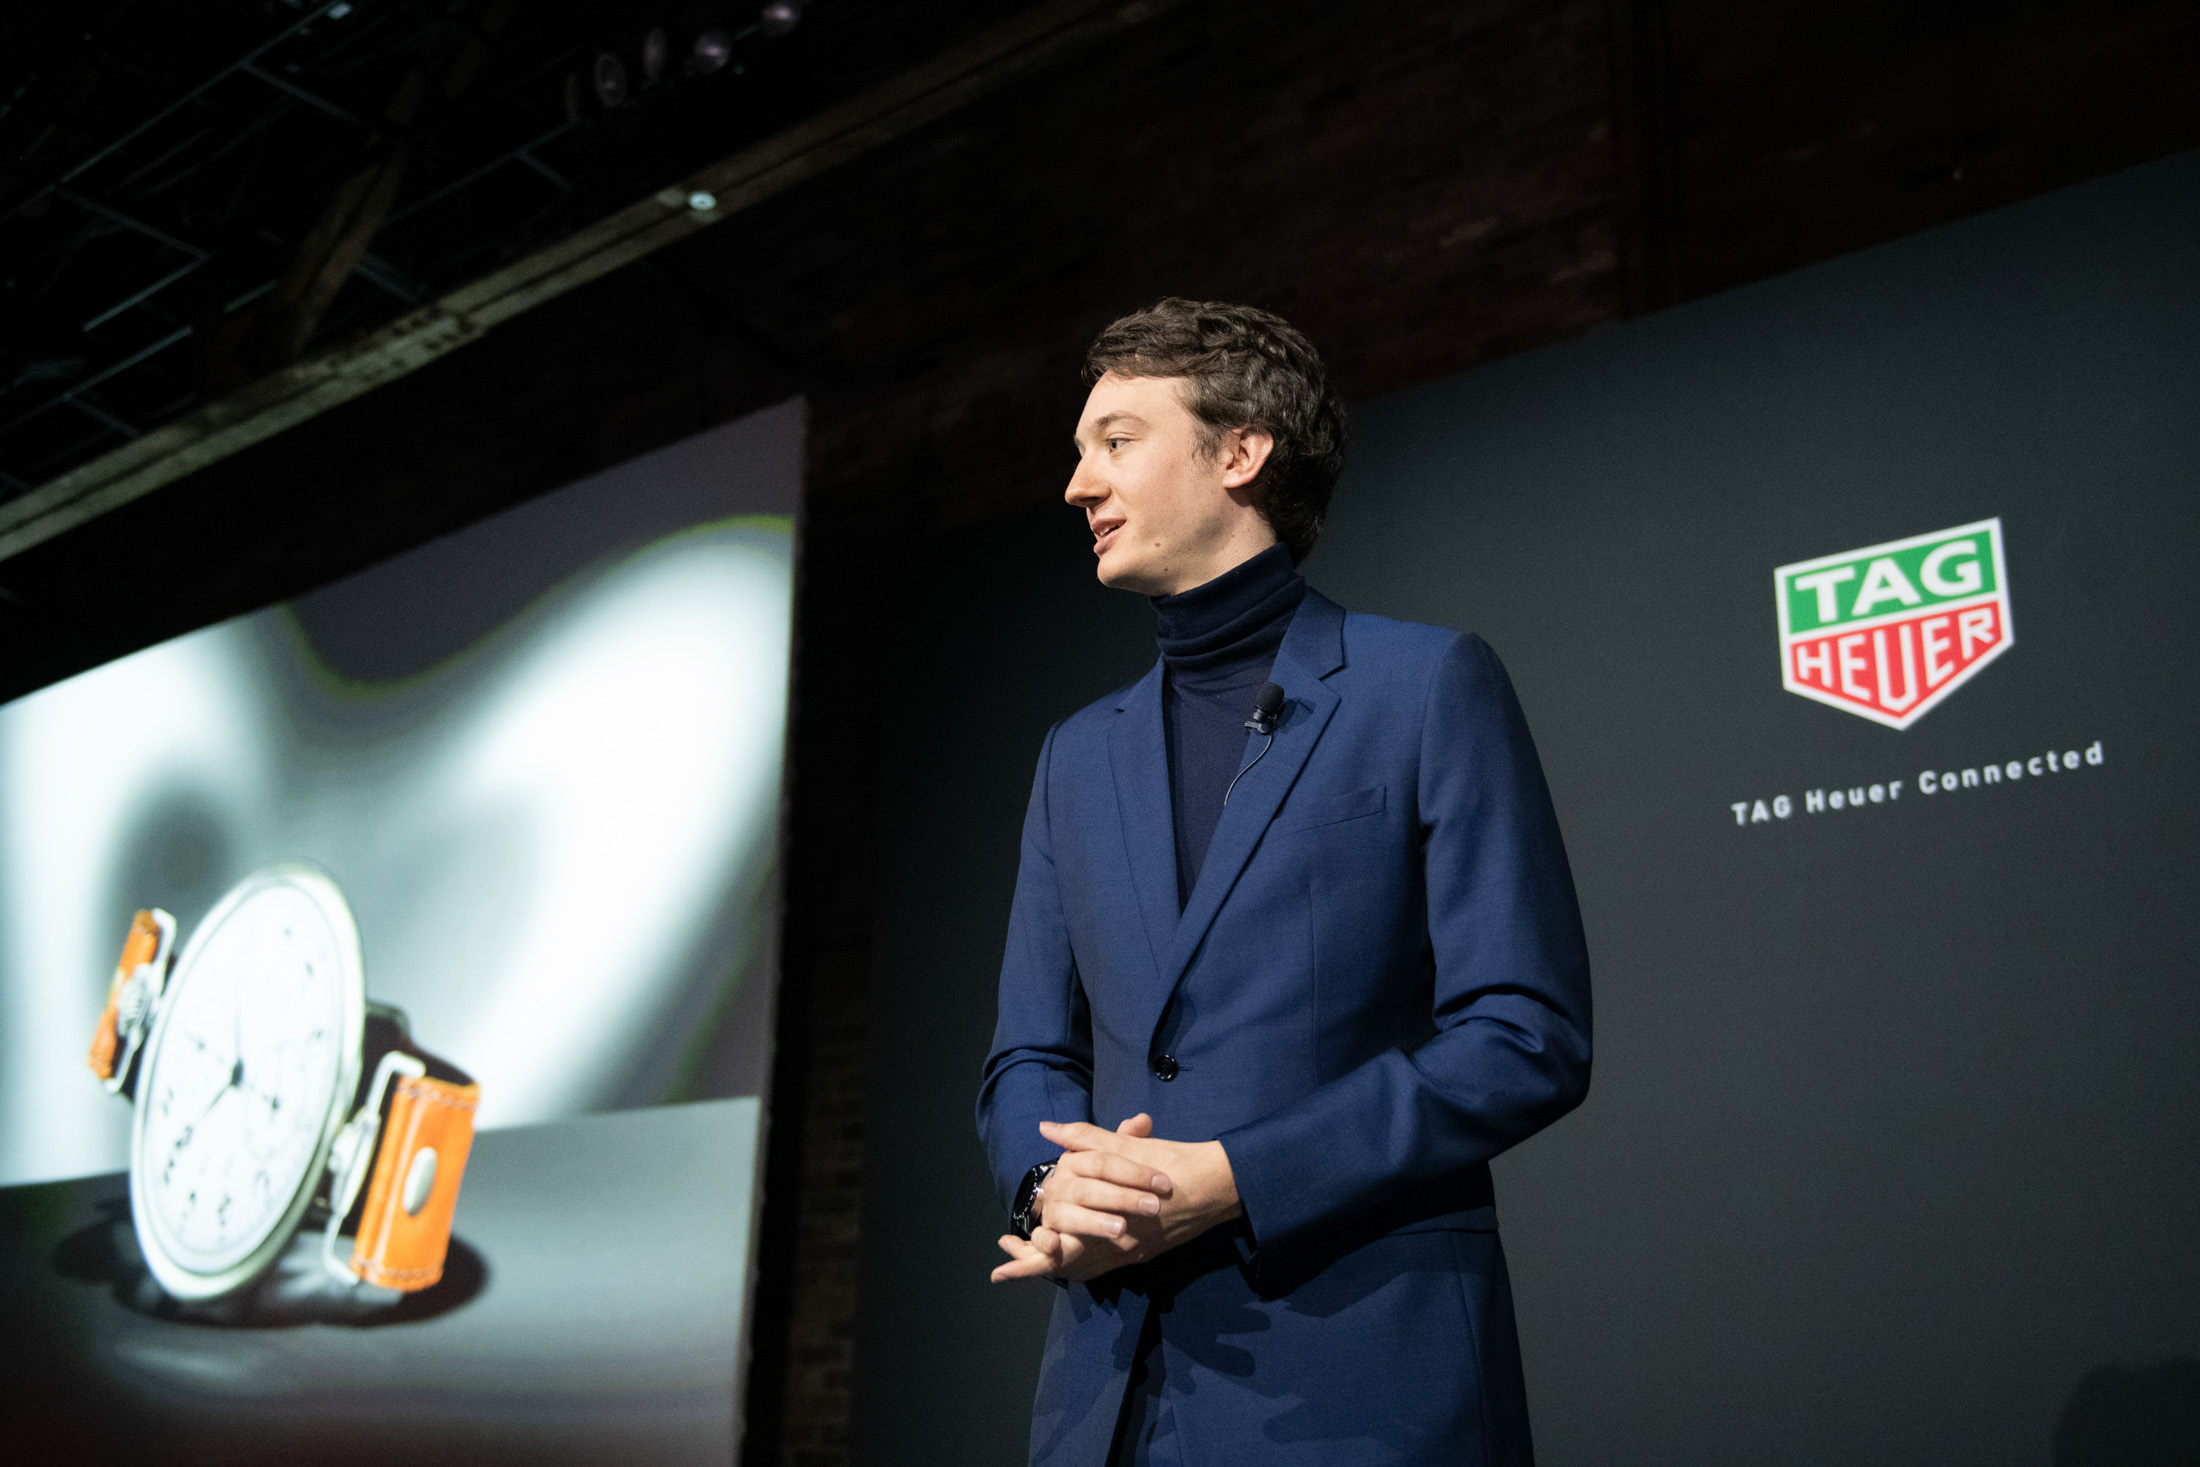 Frederic Arnault Of TAG Heuer Focuses On Staying Connected